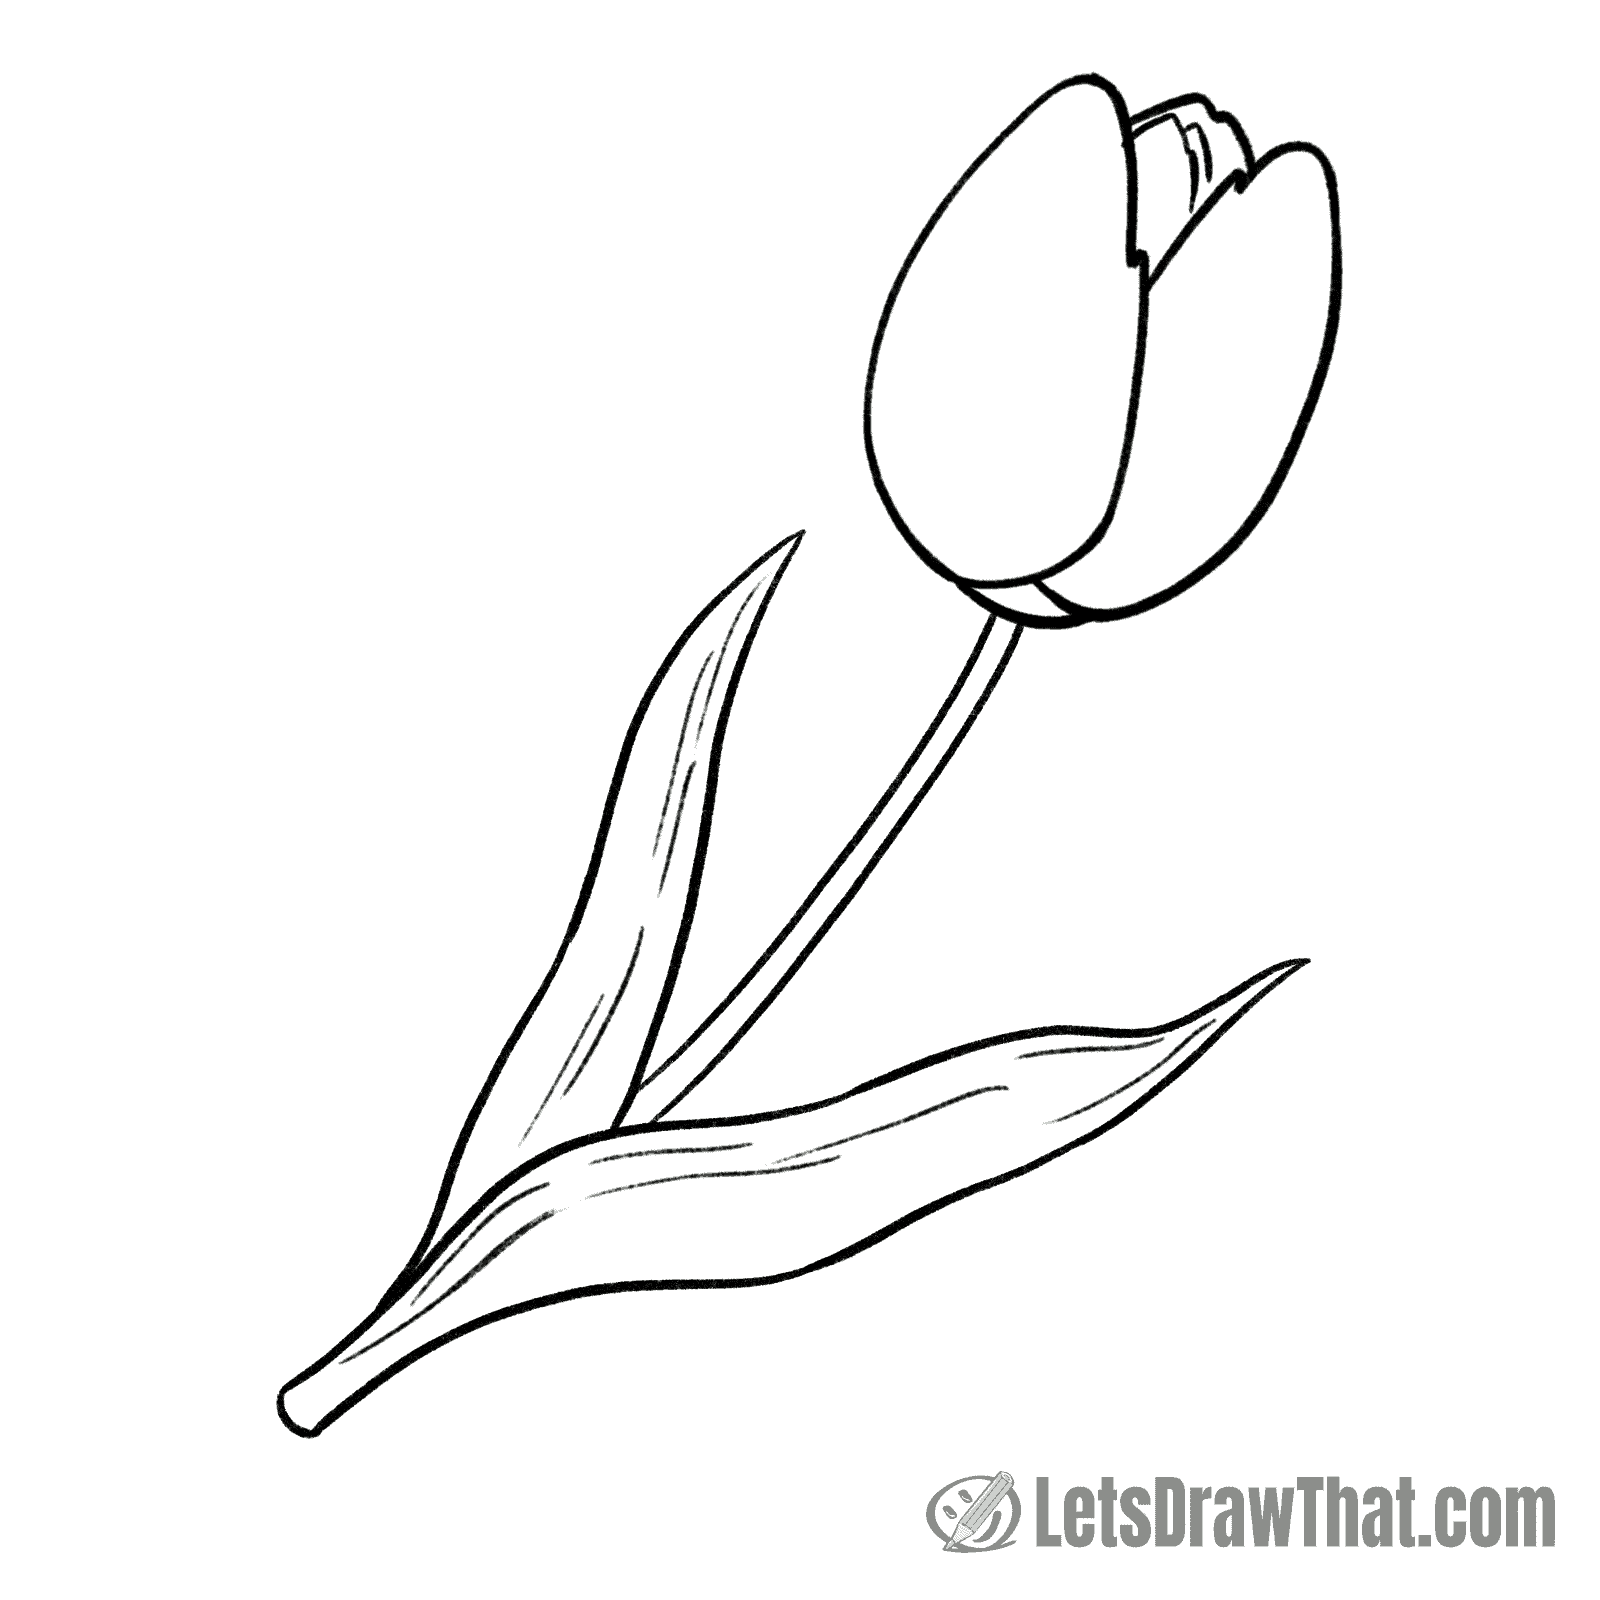 Tulip drawing outline